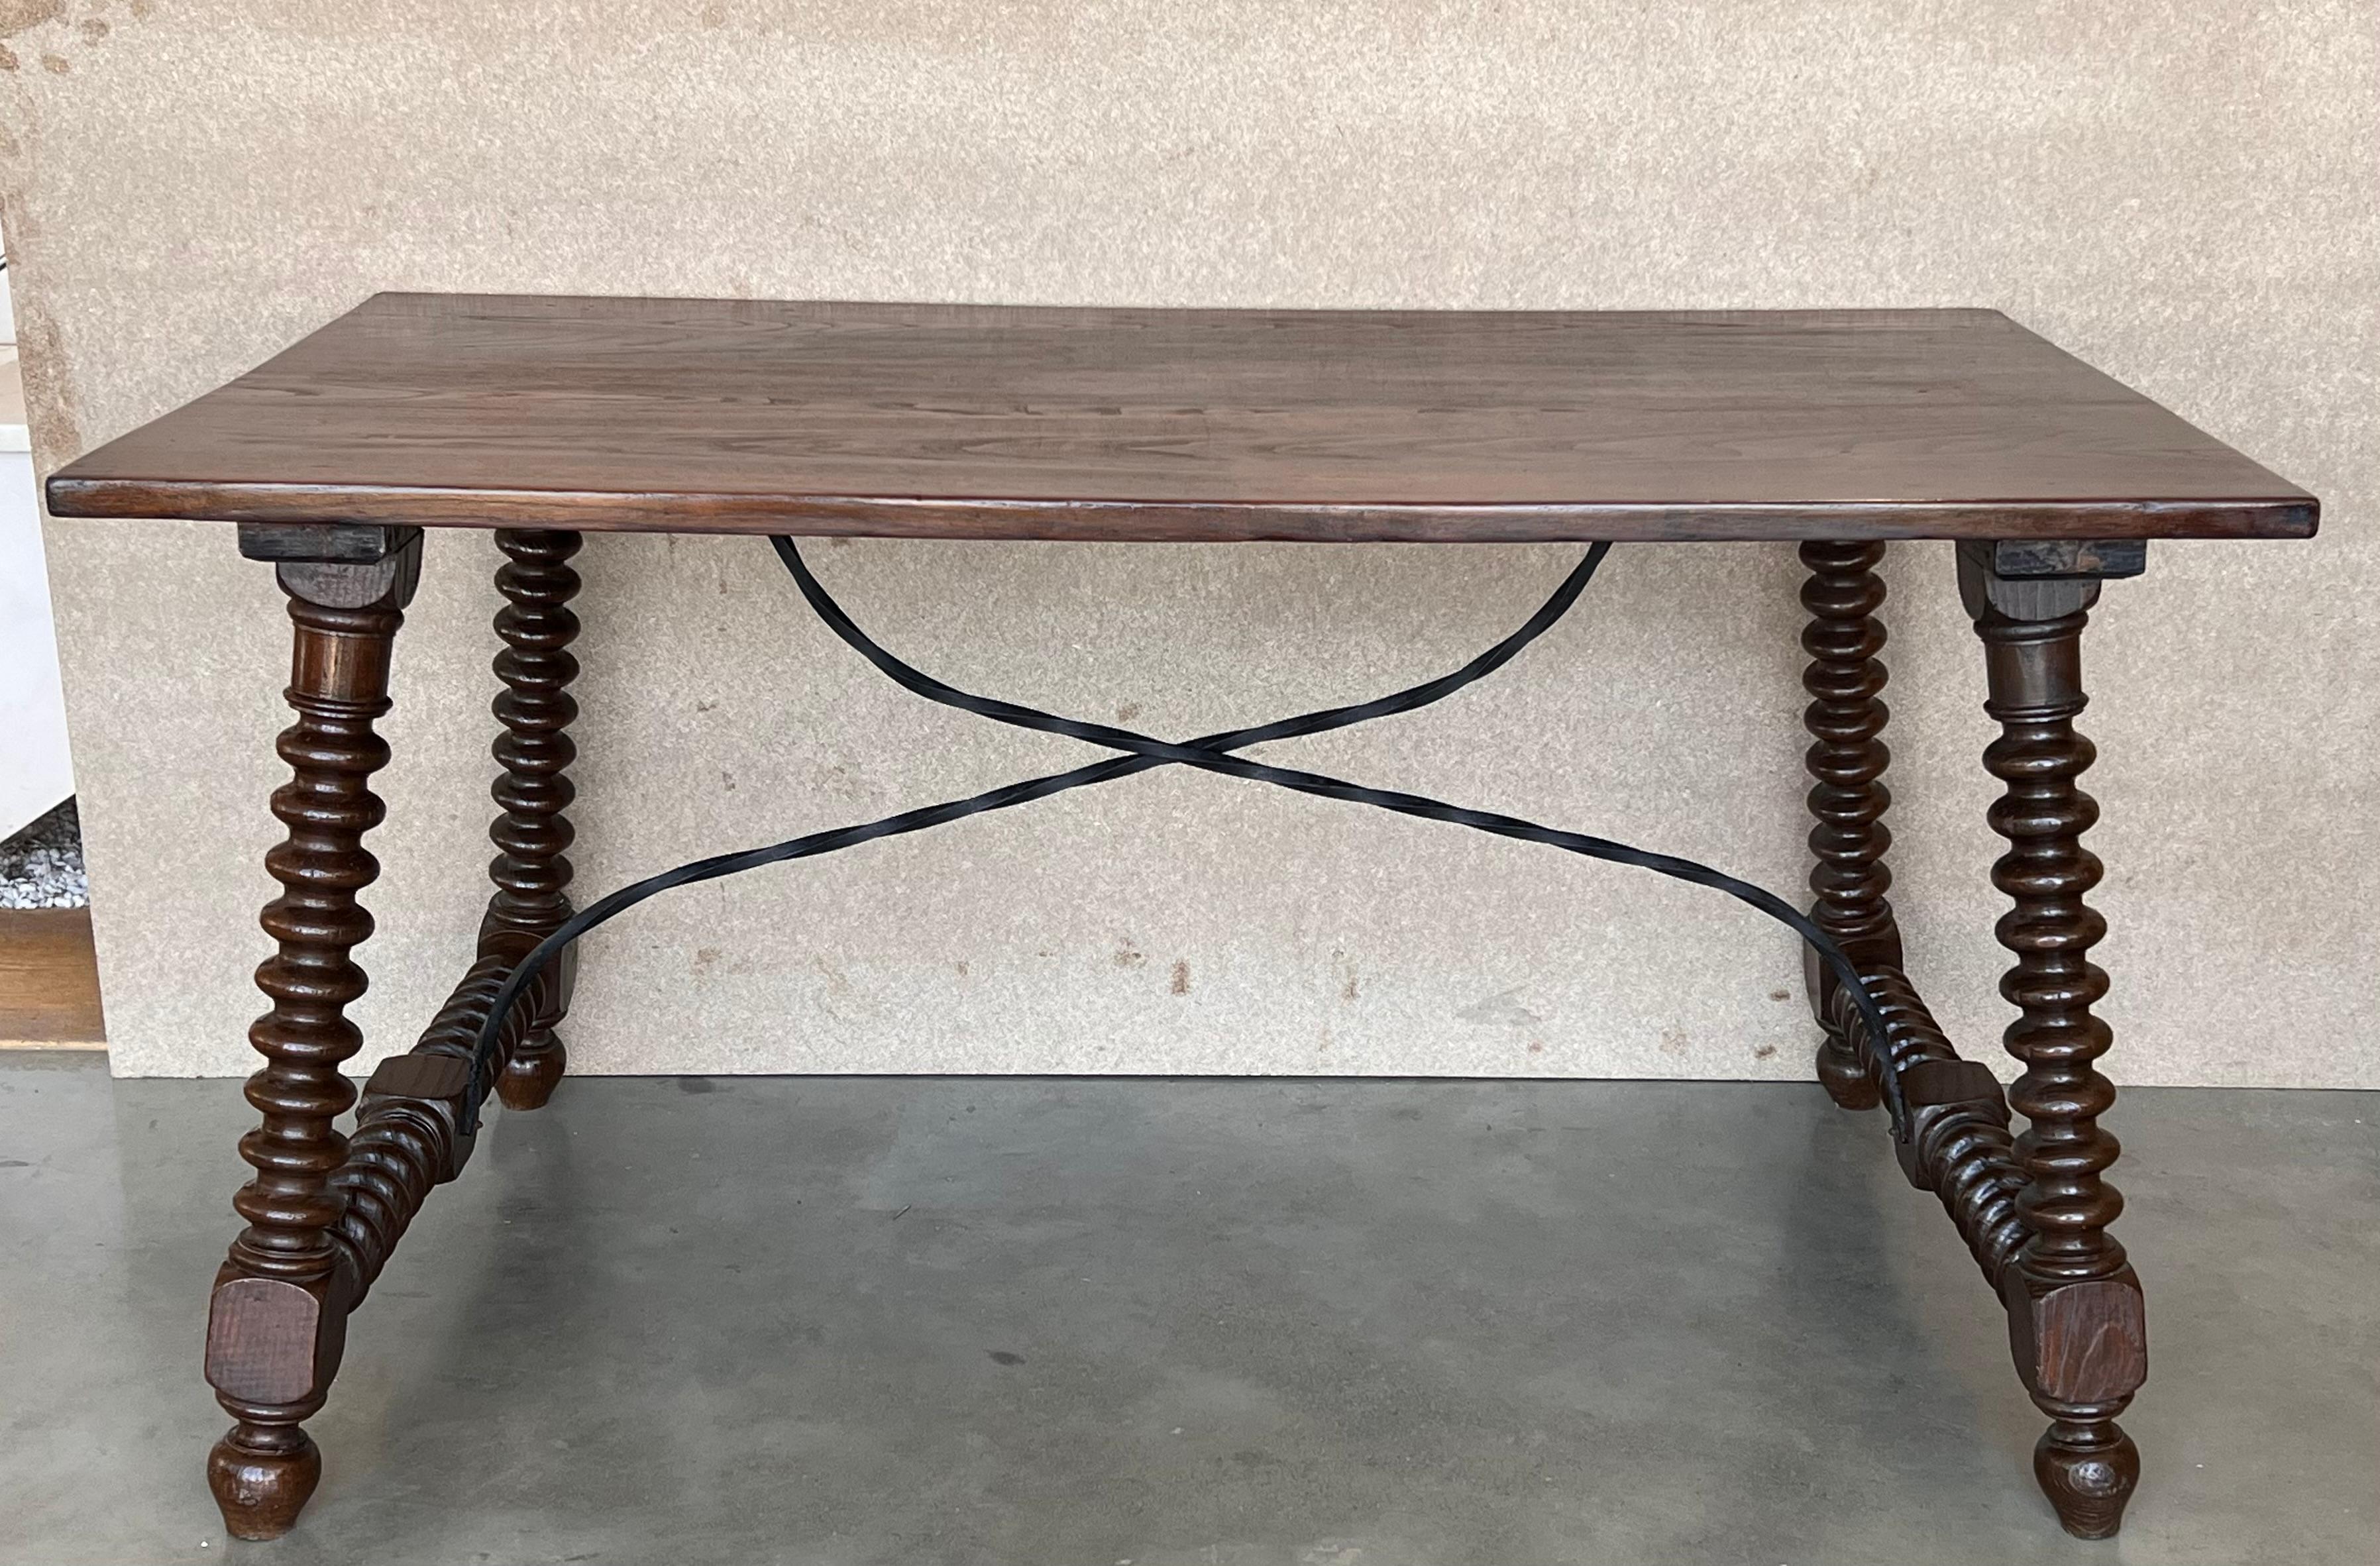 19th Spanish side table with cared turned legs and wood stretcher and also an iron stretcher 
The top has a carved edges and a beautiful grain and patina.